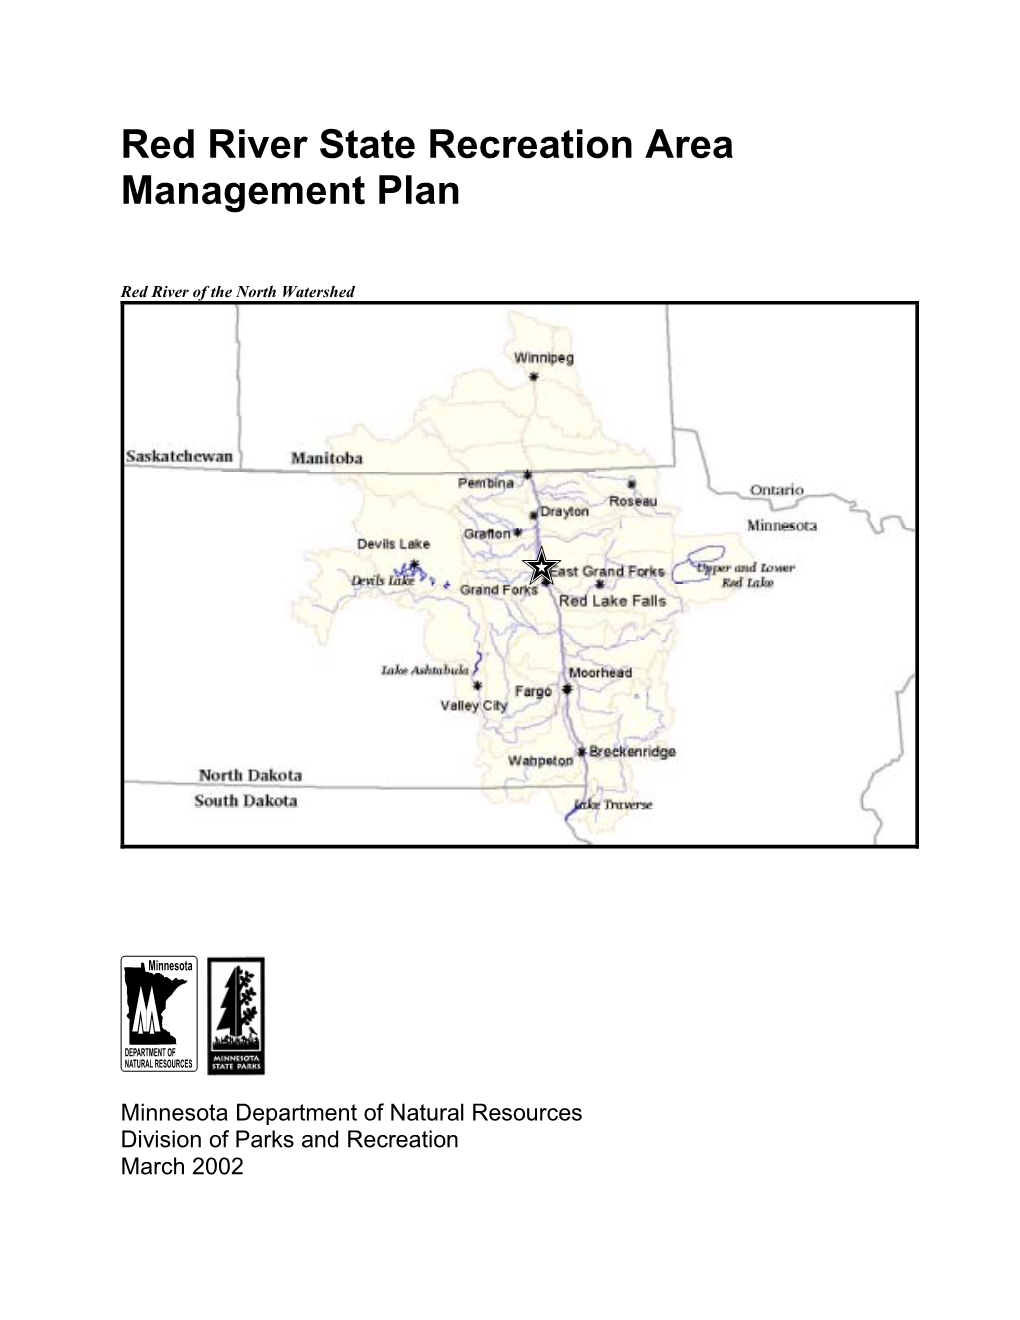 Red River State Recreation Area Management Plan